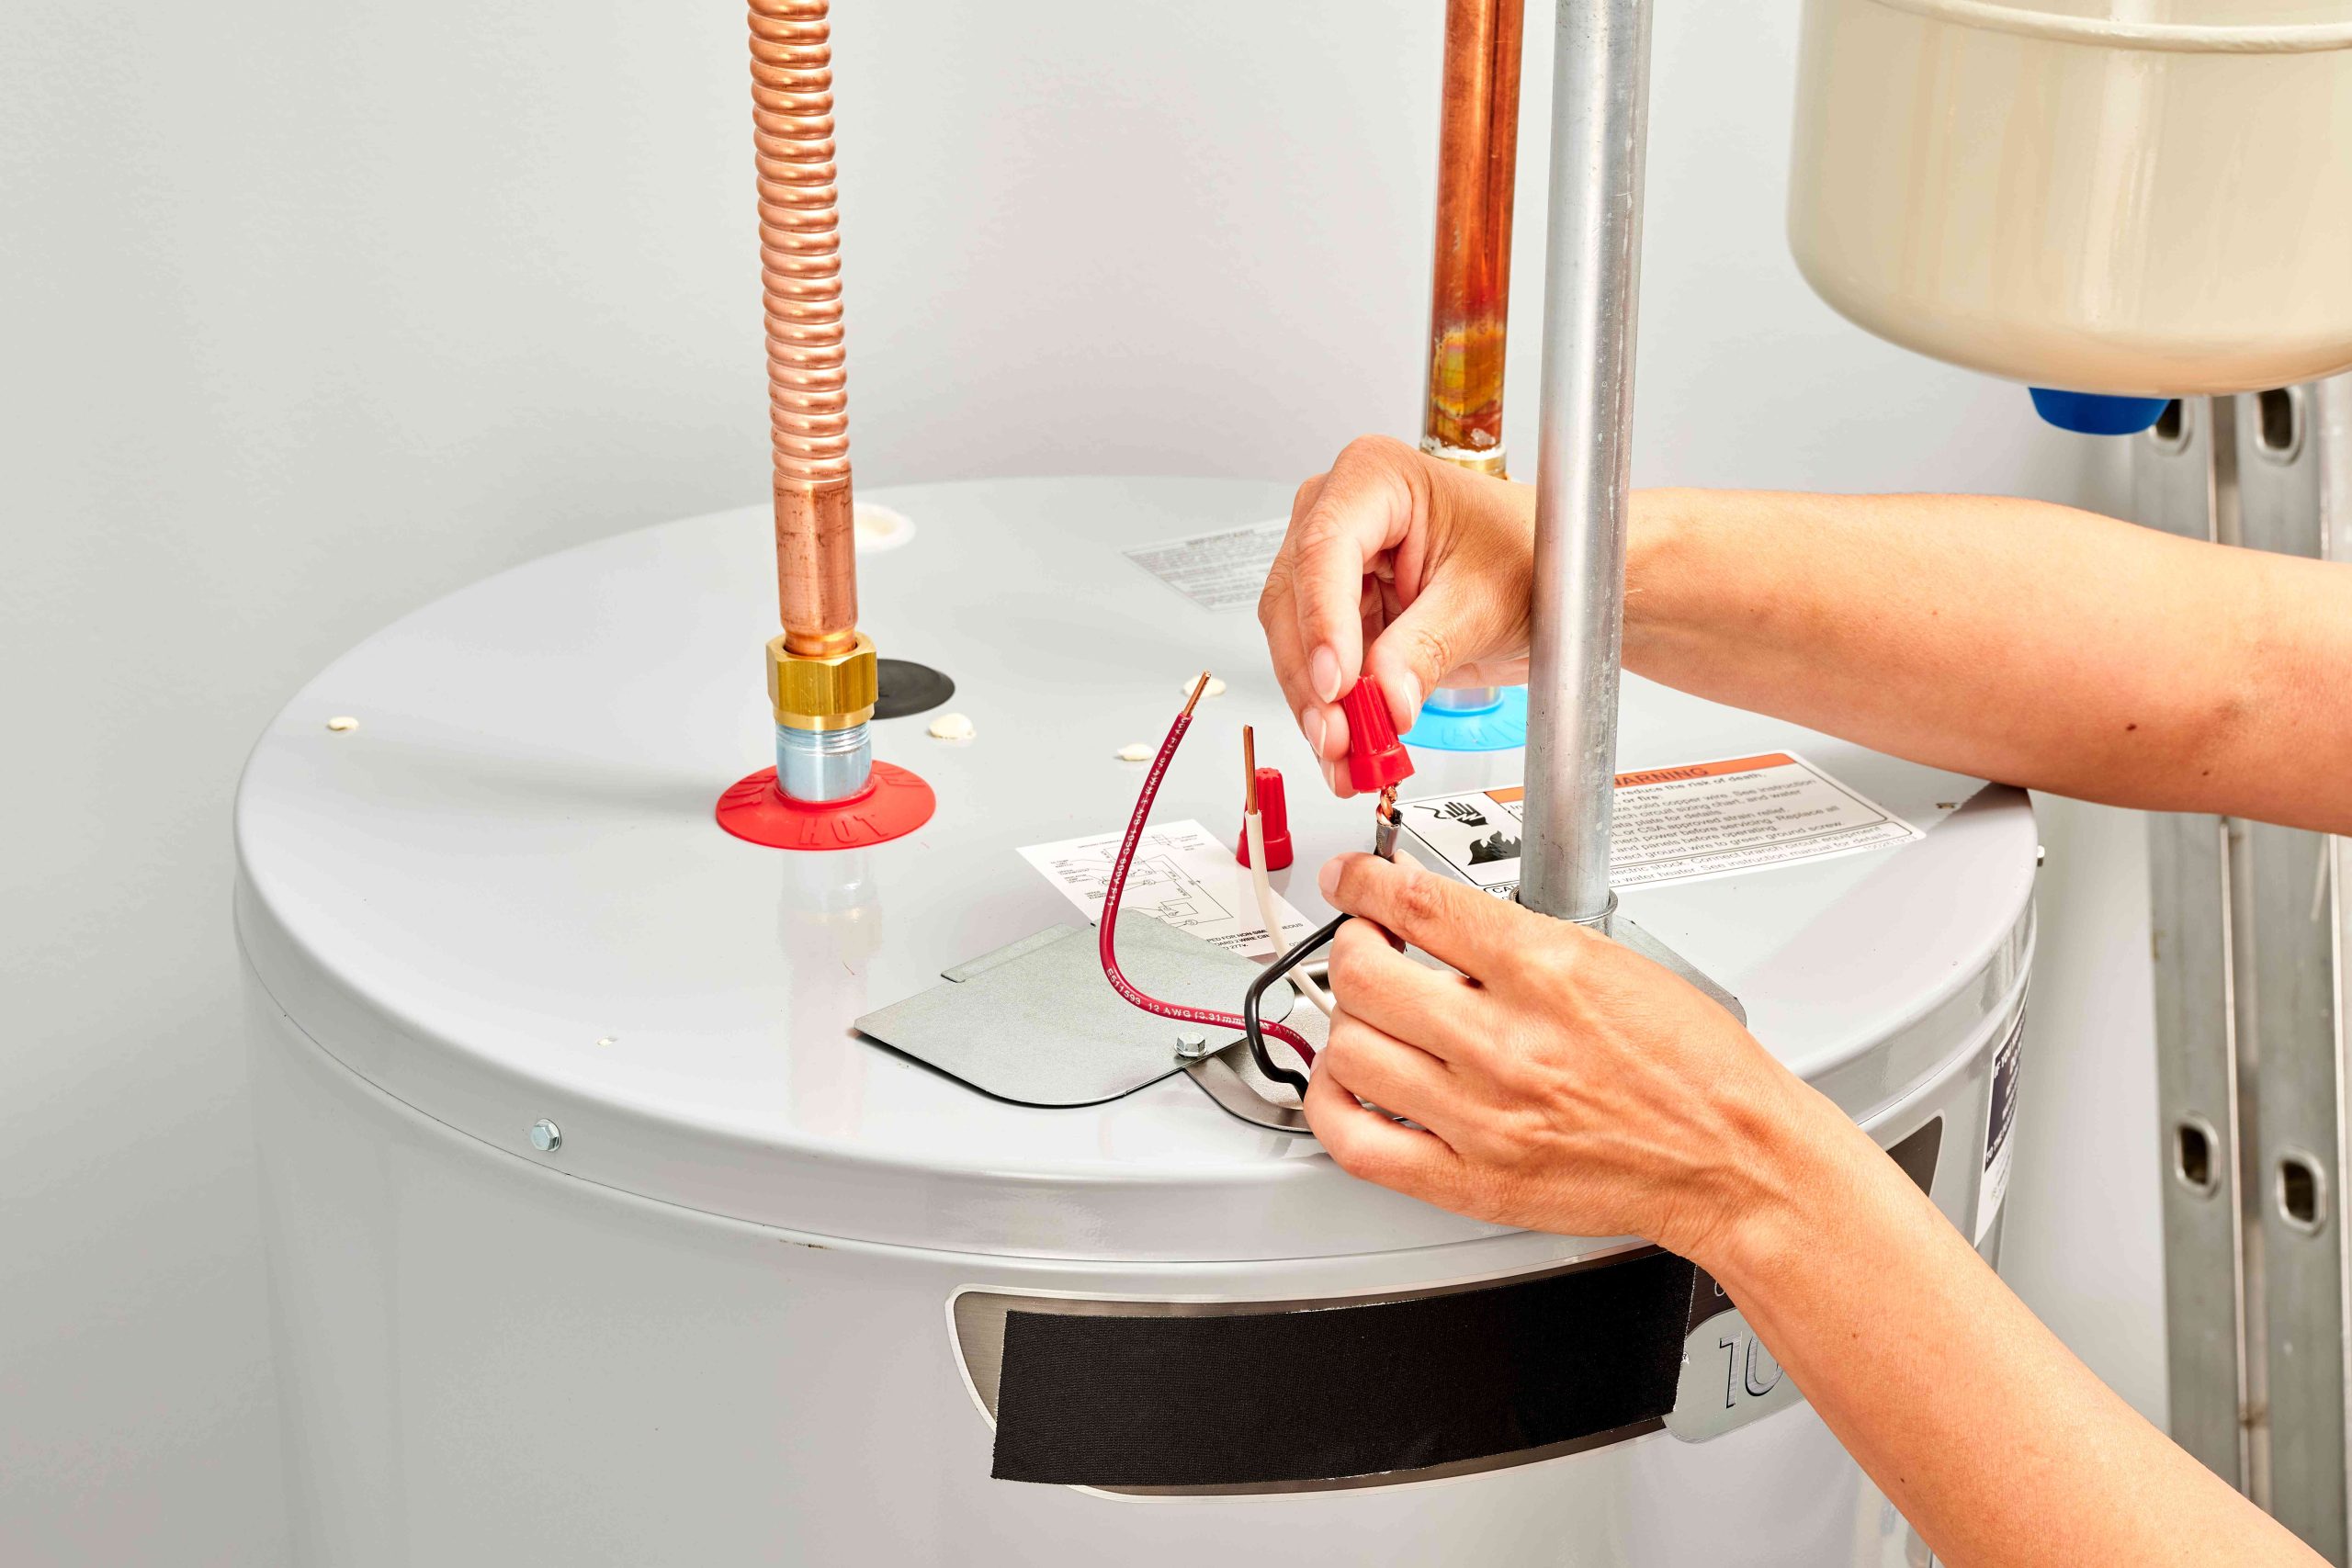 How do Electric Hot Water Systems Work